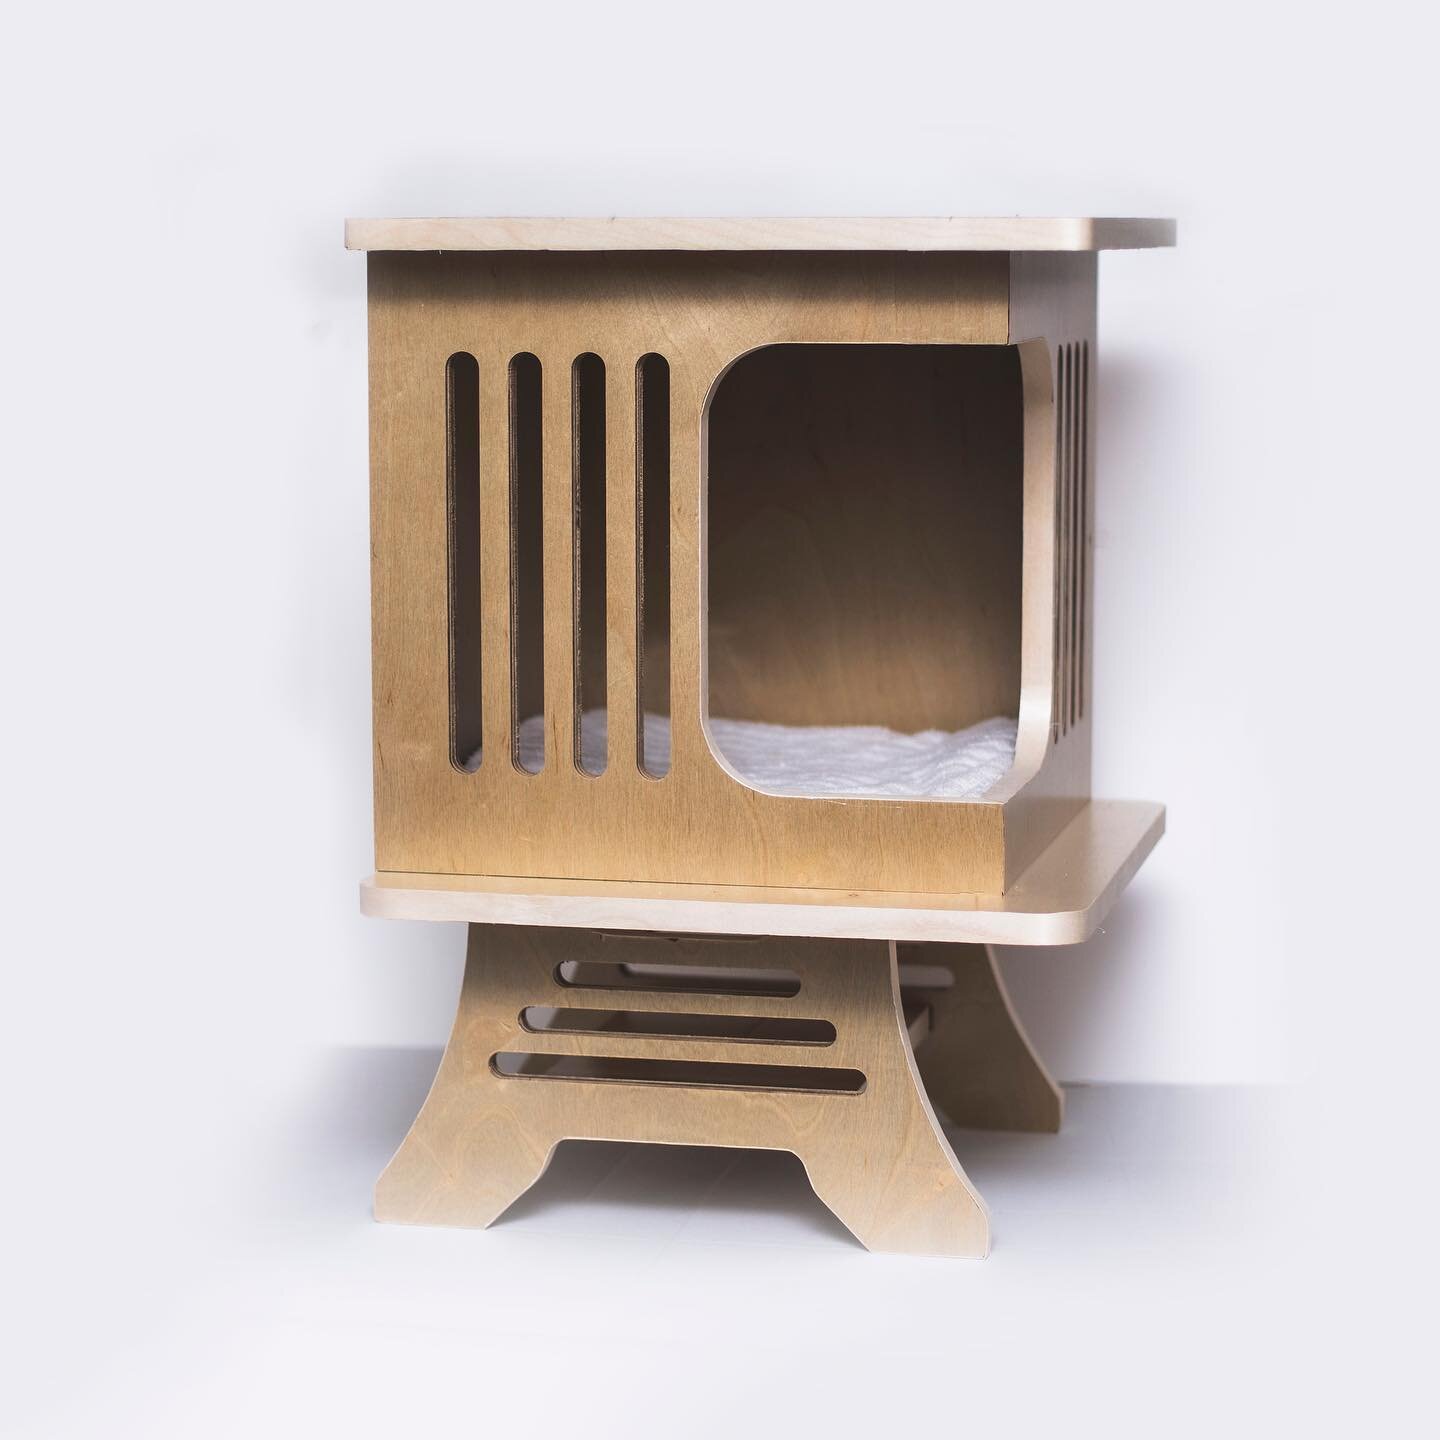 The Dojo is a cozy place to play and sleep. It is also a great hiding place for more shy cats. Also modern design will make the Dojo beautifully present in both your living room and next to the bed serving as a night cabinet.